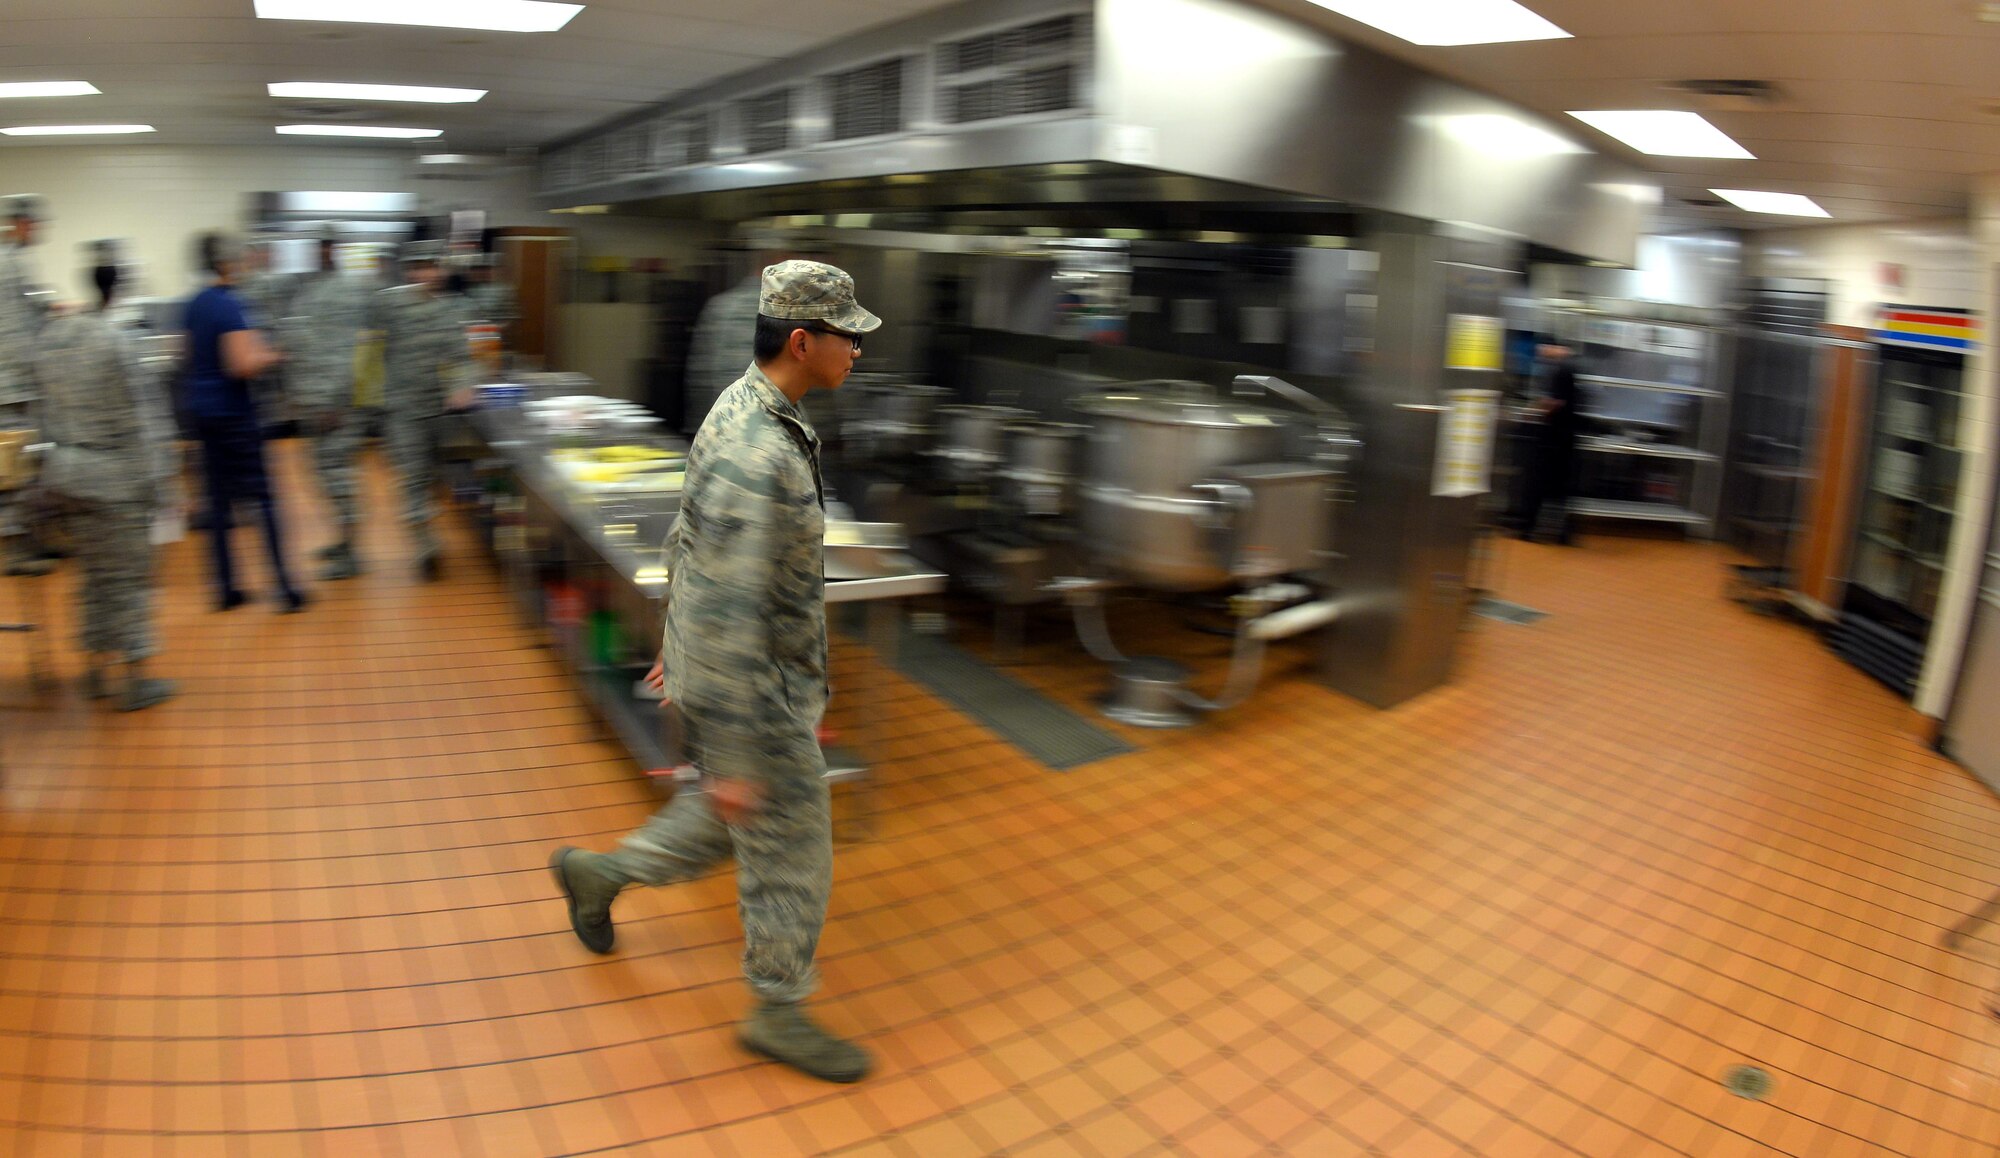 U.S. Air Force Airman 1st Class Jeff Serrano, a food service specialist with the 55th Force Support Squadron, walks through the Ronald L. King Dining Facility kitchen during an Iron Chef Competition held June 2, Offutt Air Force Base, Neb.  Two team of food service specialists had to come up with three seperate dishes each incorporating plantains to be served to a panel of judges.  (U.S. Air Force photo by Josh Plueger/Released)